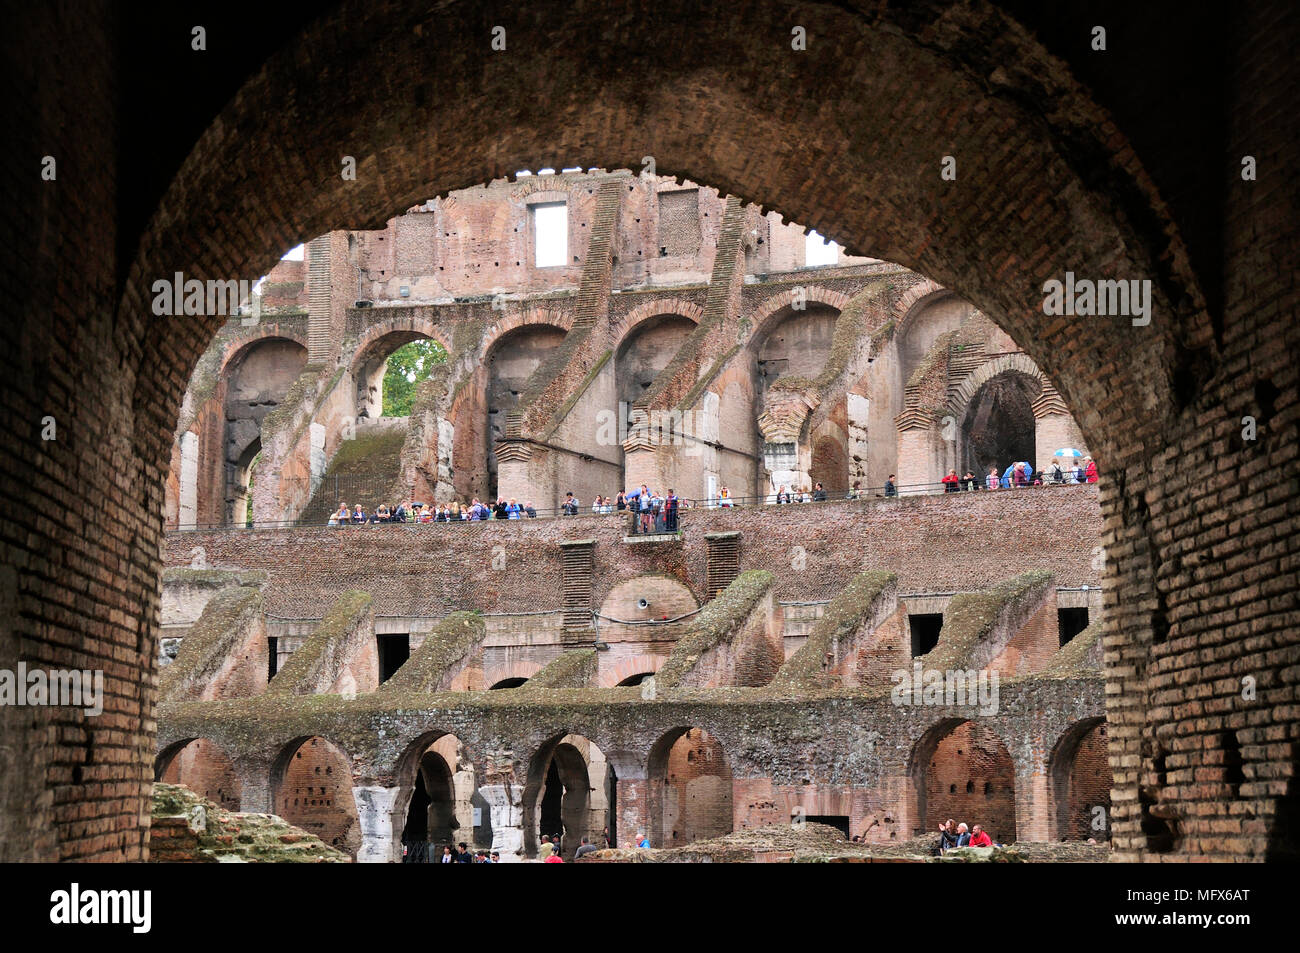 The Colosseum or Coliseum. The construction began under the emperor Vespasian in 70 AD and was completed in 80 AD under his successor Titus. It could  Stock Photo